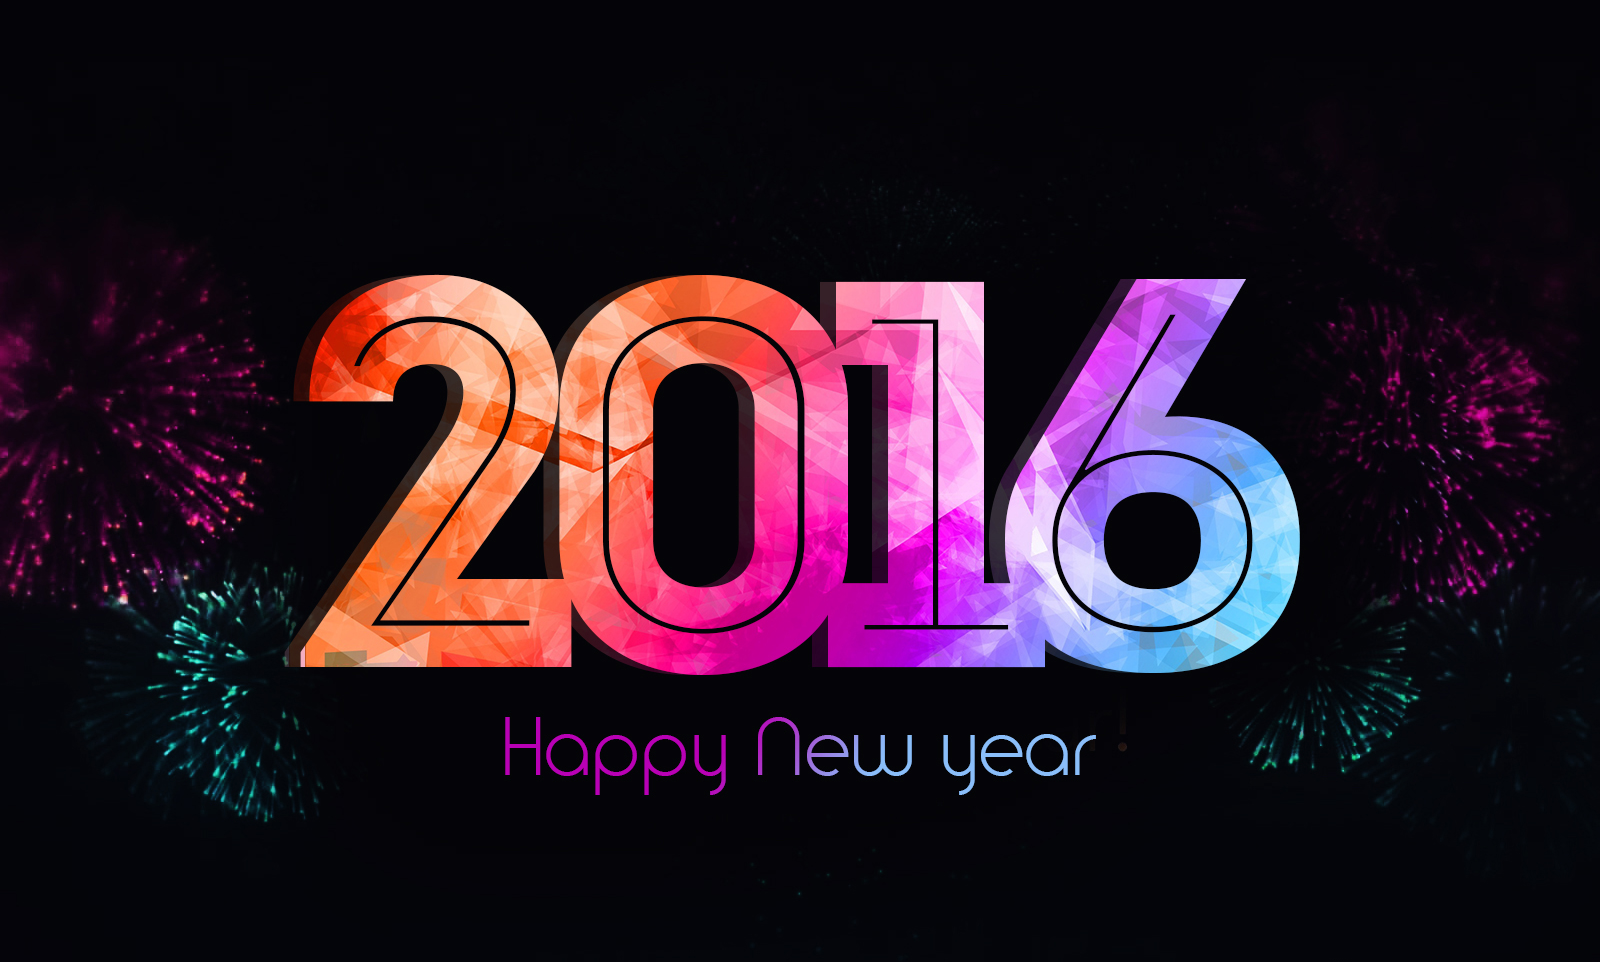 Happy New Year 2016 HD Wallpapers for PC Desktops   Happy New Year